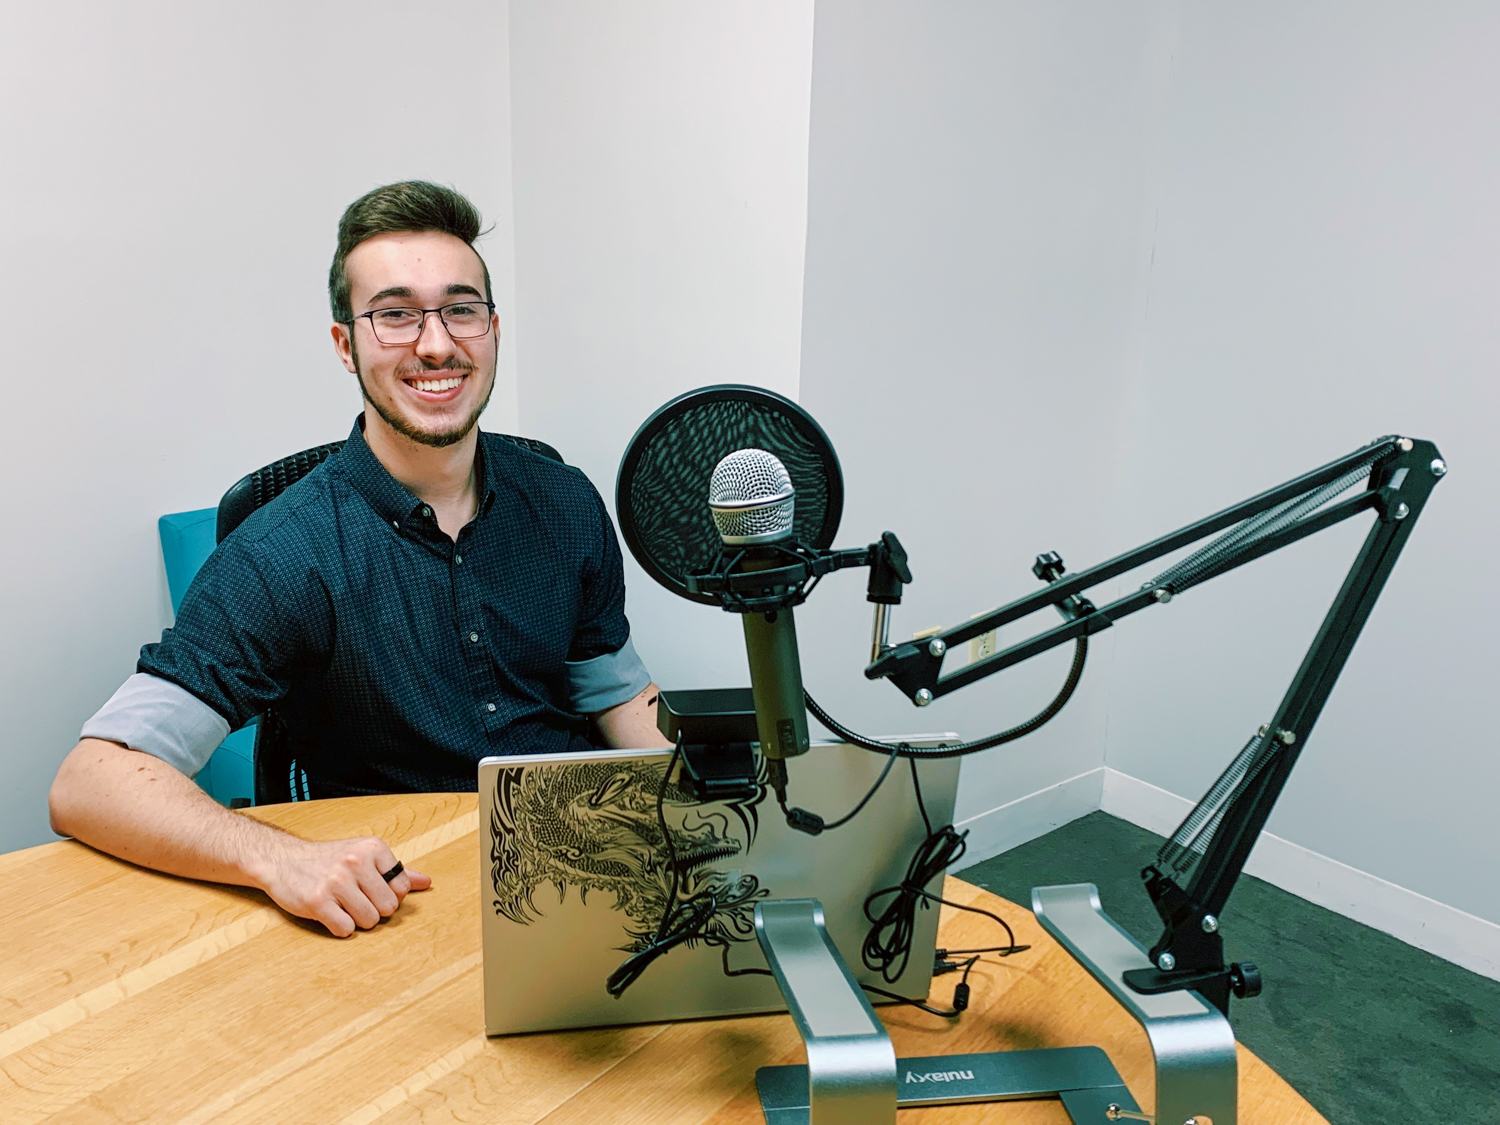 A male student seated at a table poses with his laptop and podcasting equipment